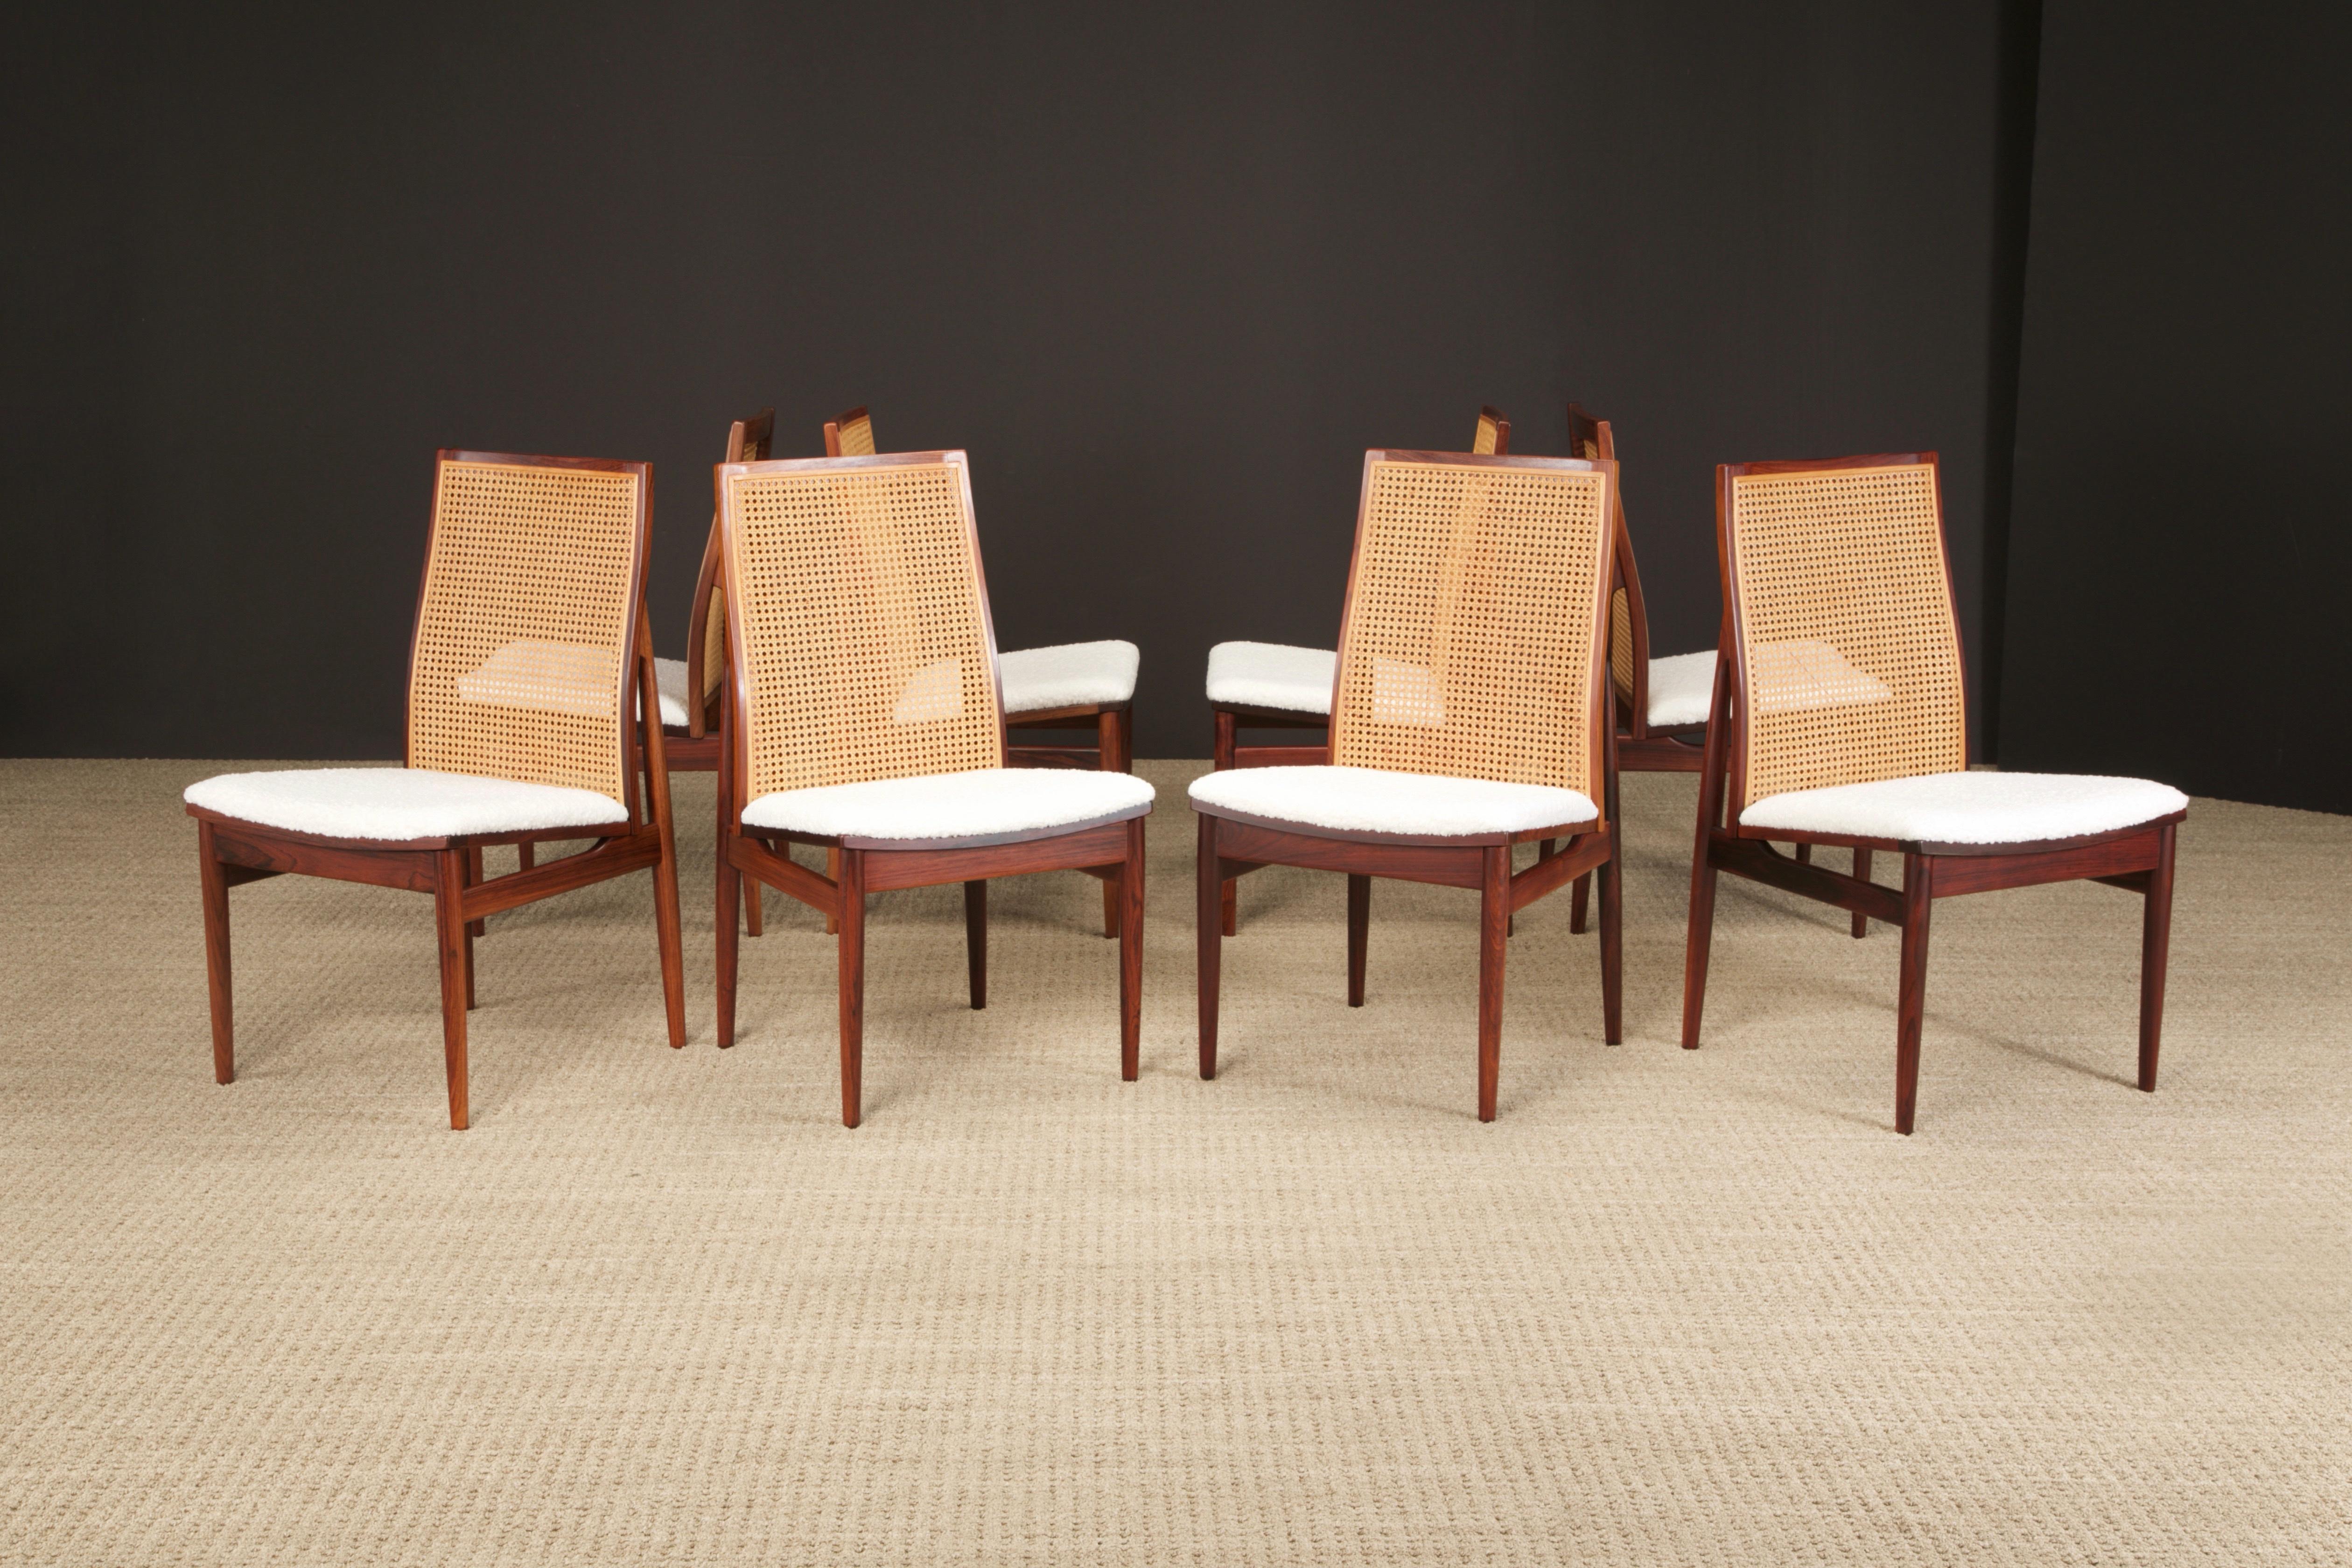 This incredible set of 8 dining chairs feature gorgeous deep grained Rosewood with caned seat backs and newly reupholstered bouclé seats. 

While these share many similarities with designs by Brazilian modernism designer Joaquim Tenreiro, this set